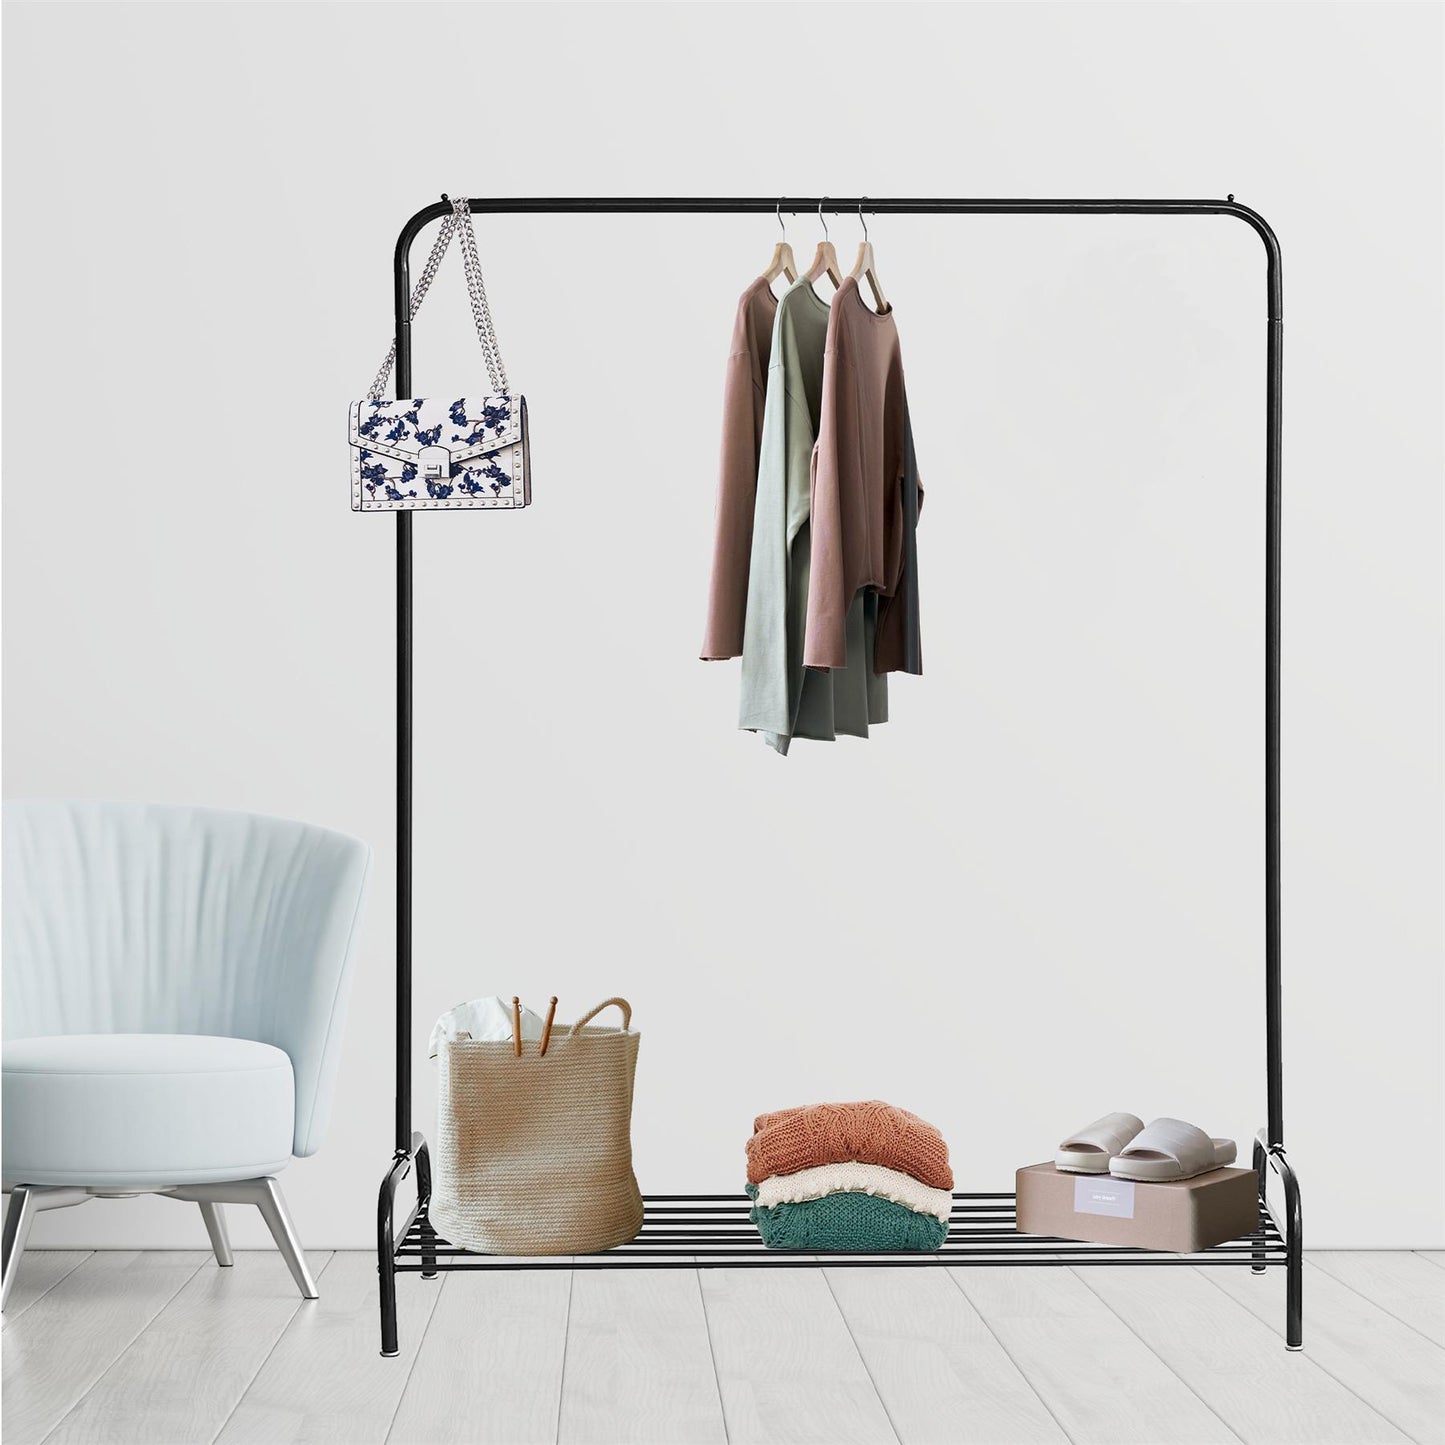 Convenient Clothes Drying Rack With Additional Shoe Storage Shelf